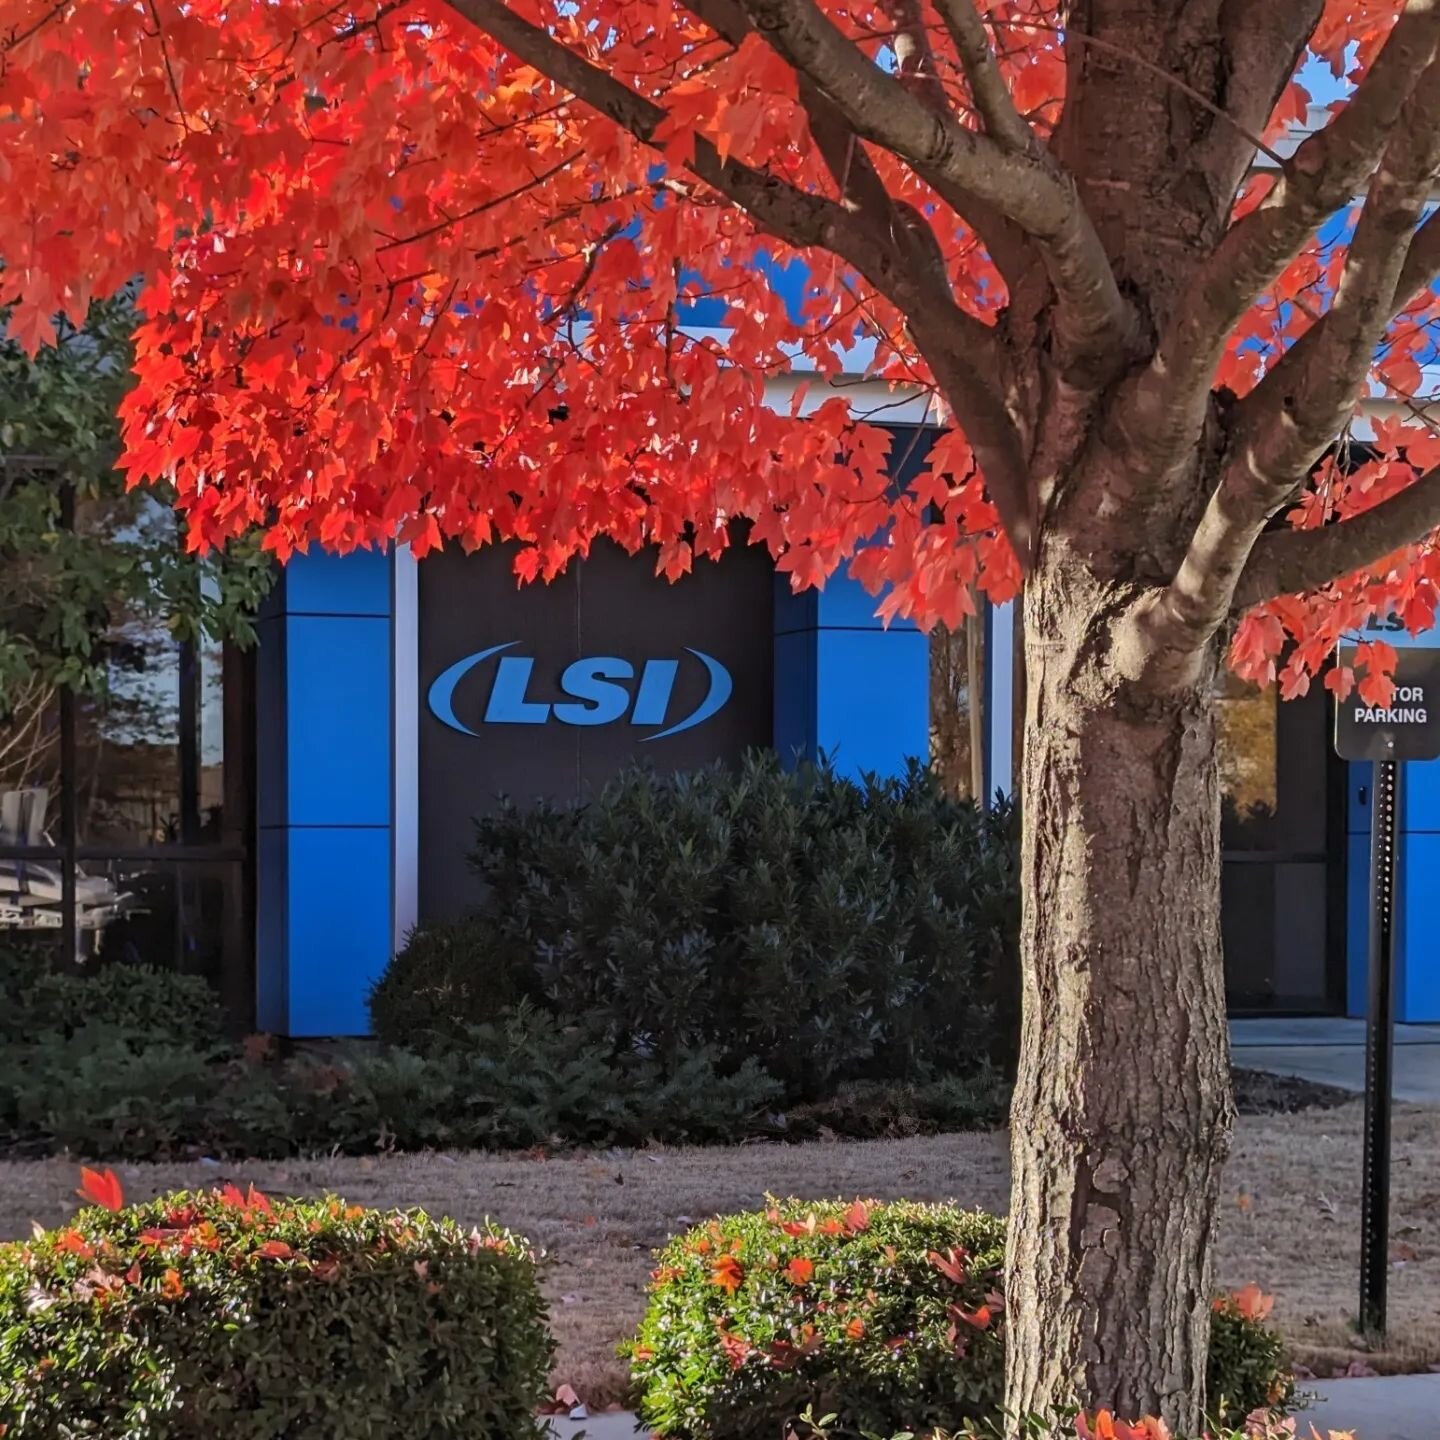 The front of our office is popping with vibrance this fall season as we move into winter in the very near future.

We've never seen so much red on our tree before!

.
.
.

#Fall #ChristmasVibes #LSIGraphics #Memphis #TN